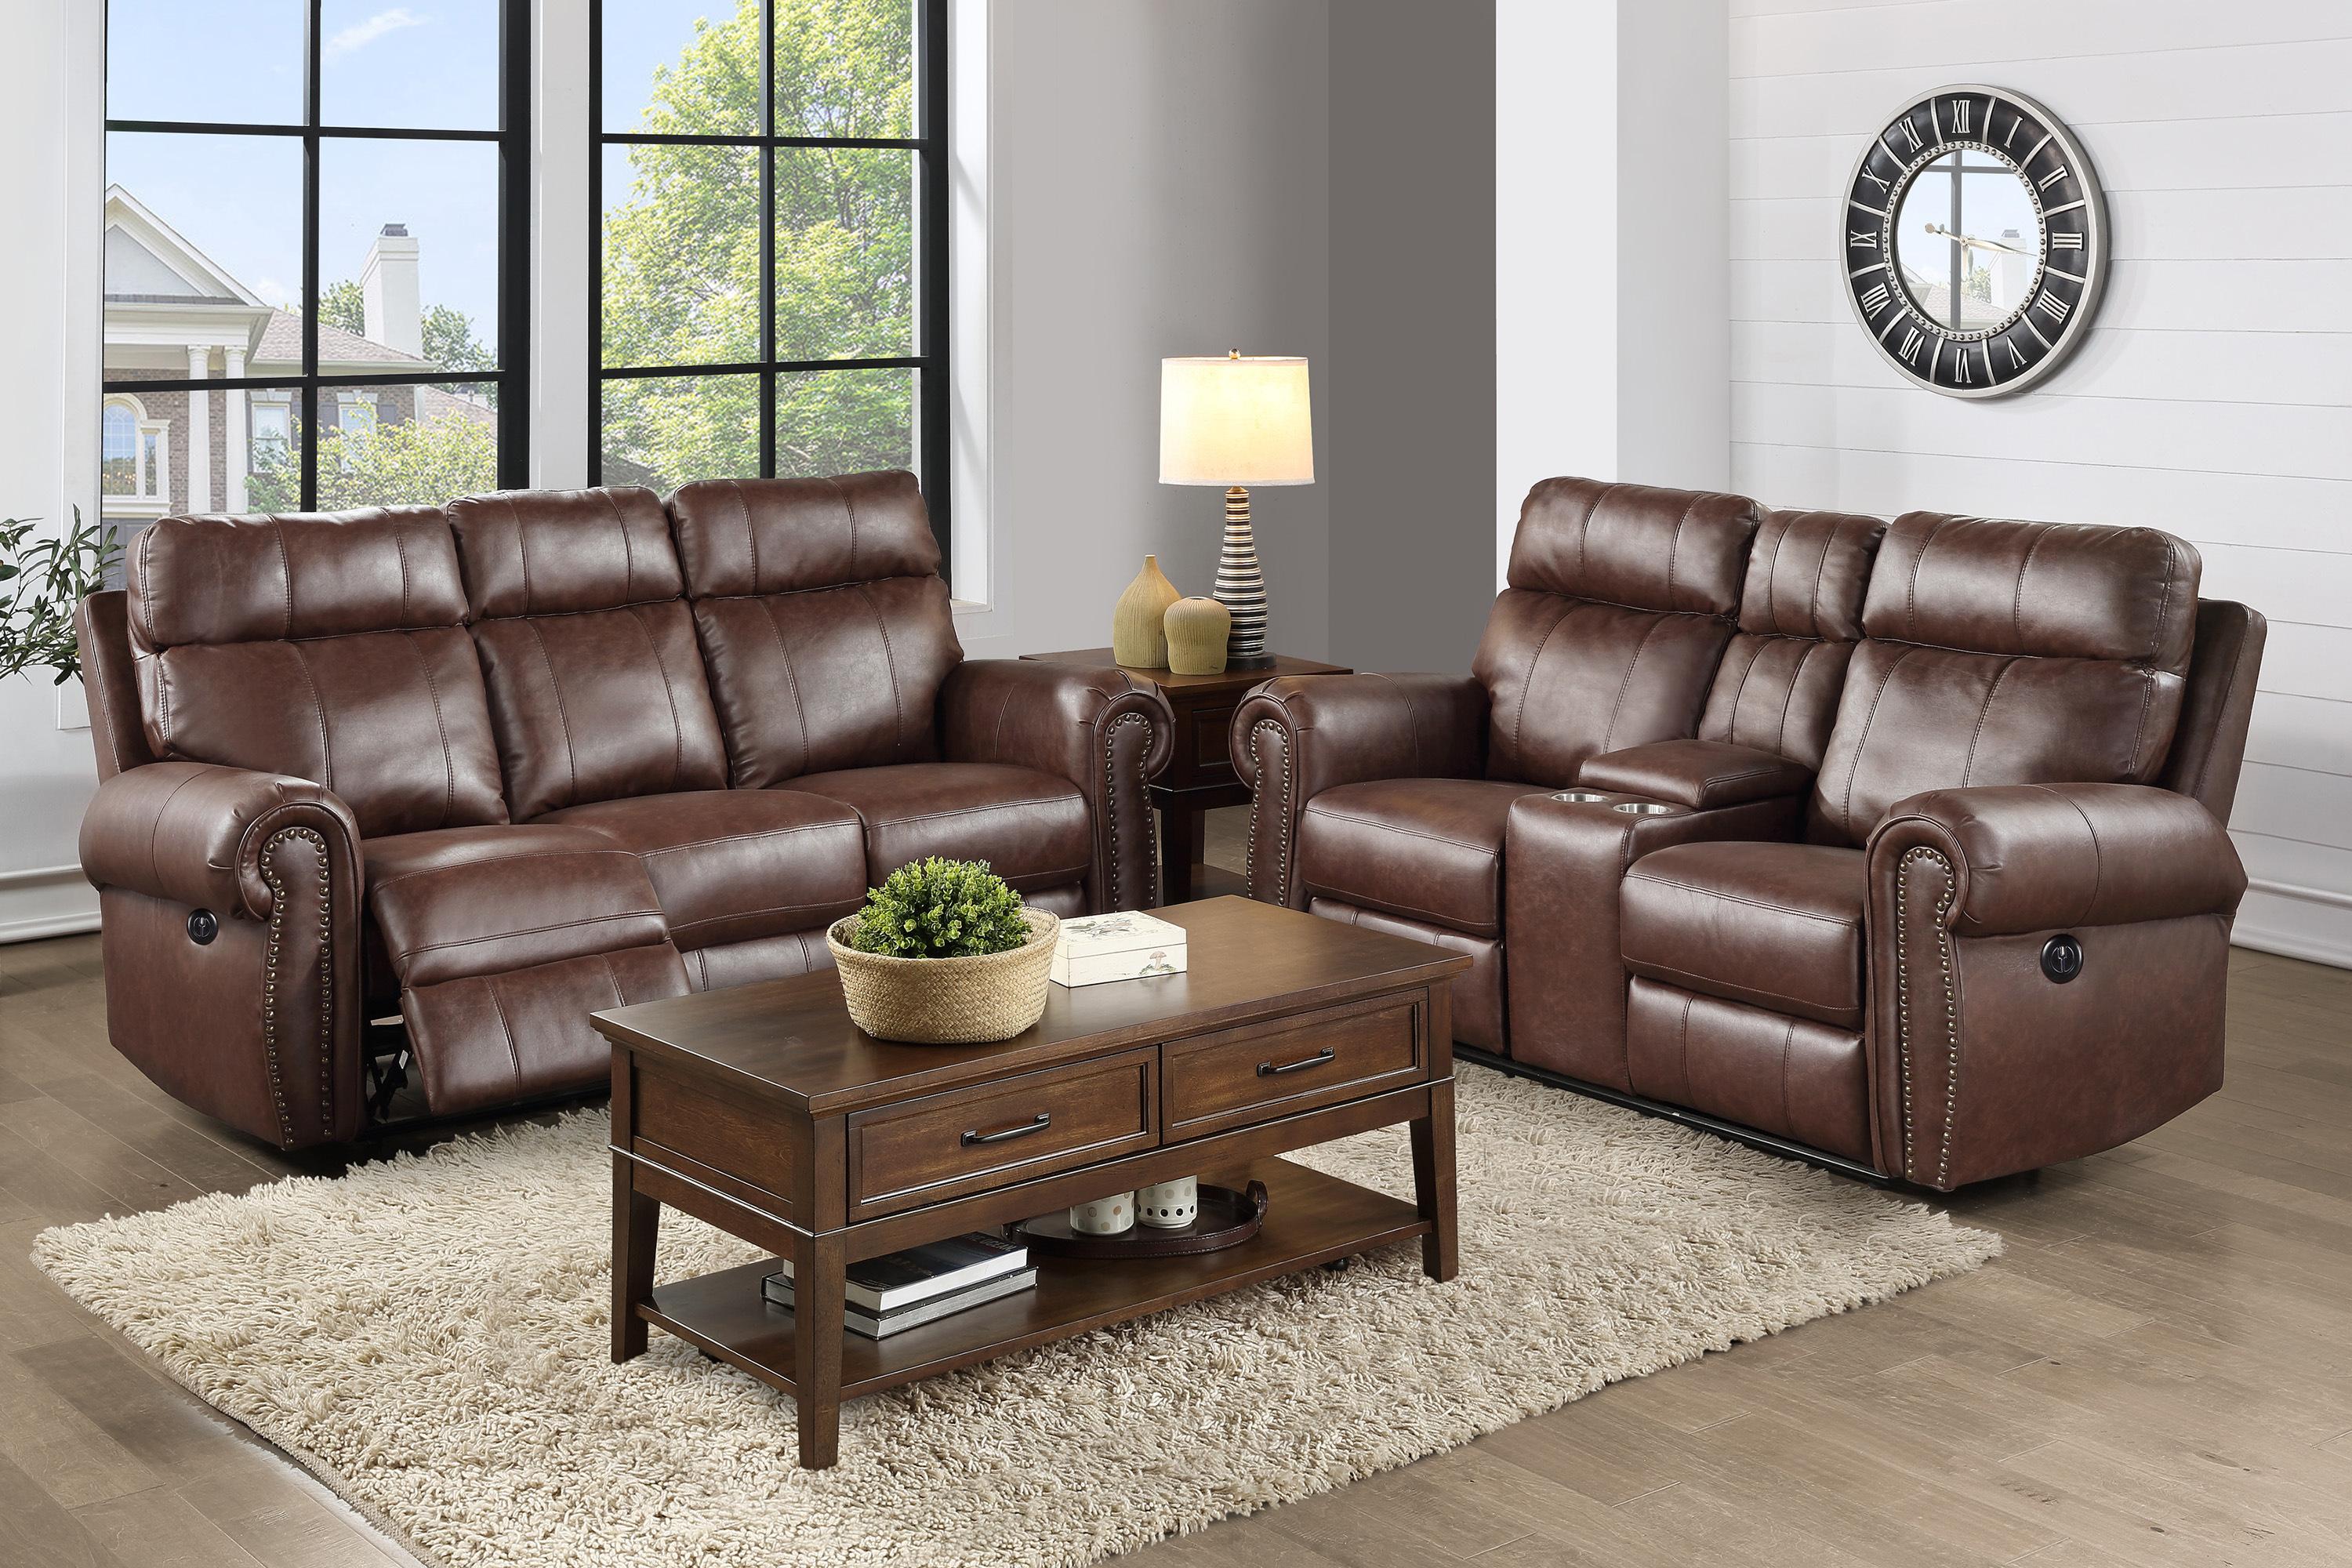 Transitional Reclining Set 9488BR-2PC Granville 9488BR-2PC in Brown Microfiber